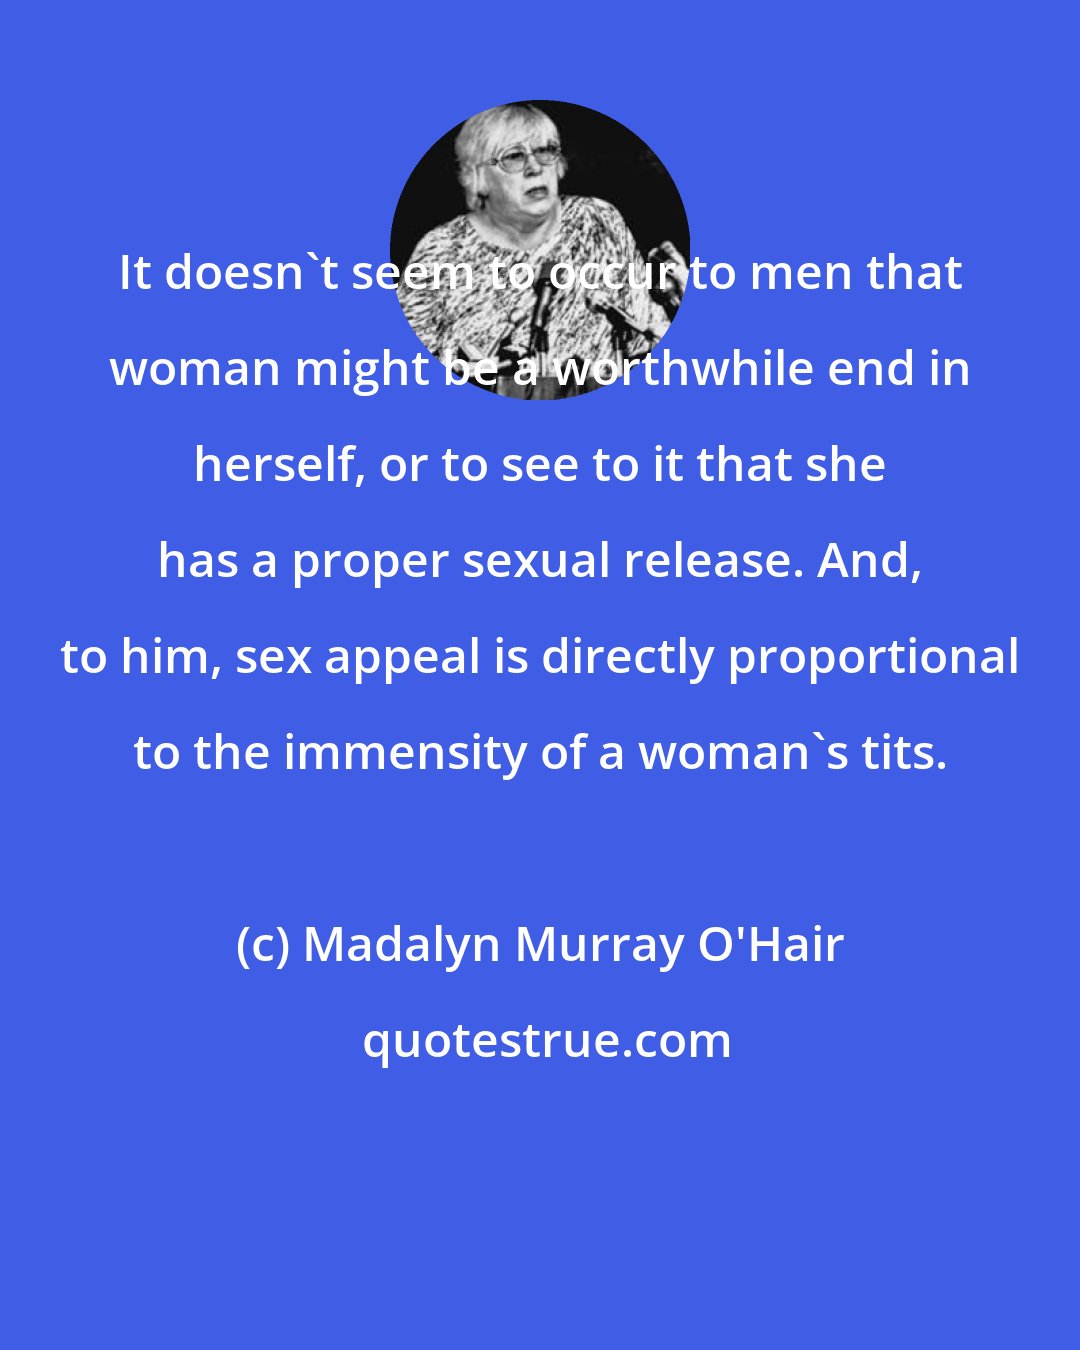 Madalyn Murray O'Hair: It doesn't seem to occur to men that woman might be a worthwhile end in herself, or to see to it that she has a proper sexual release. And, to him, sex appeal is directly proportional to the immensity of a woman's tits.